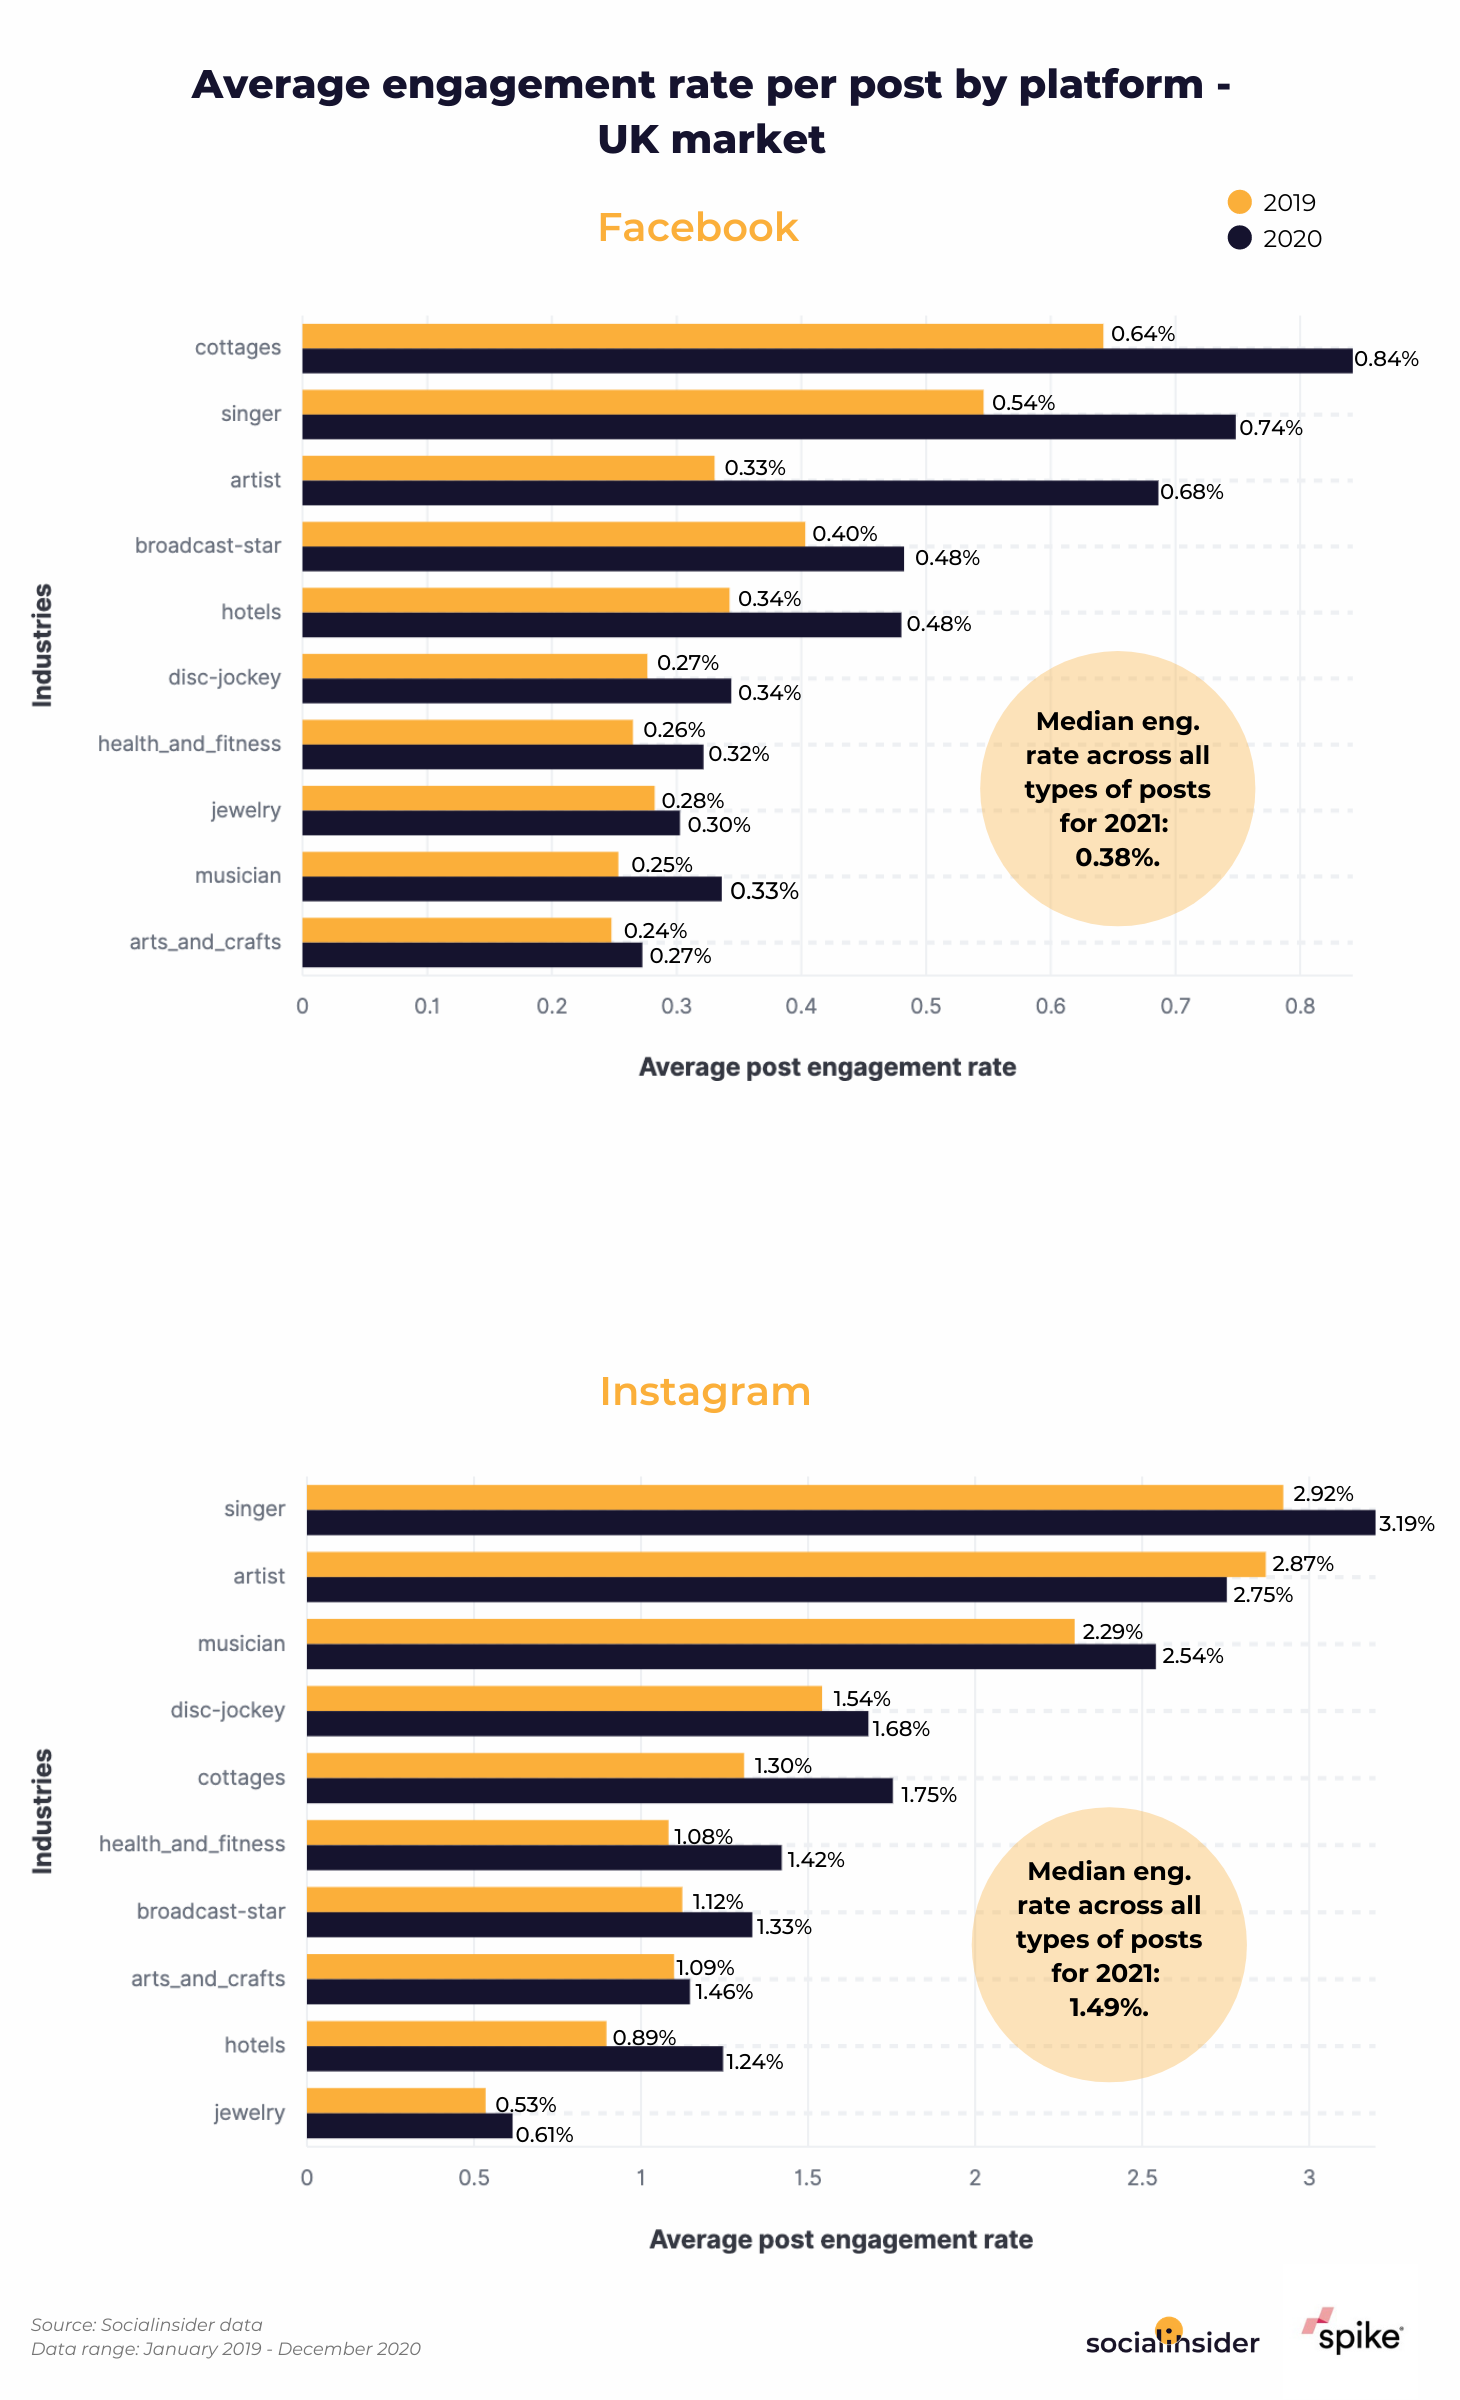 Here's a comparison of average engagement on Facebook and Instagram for the Uk market.